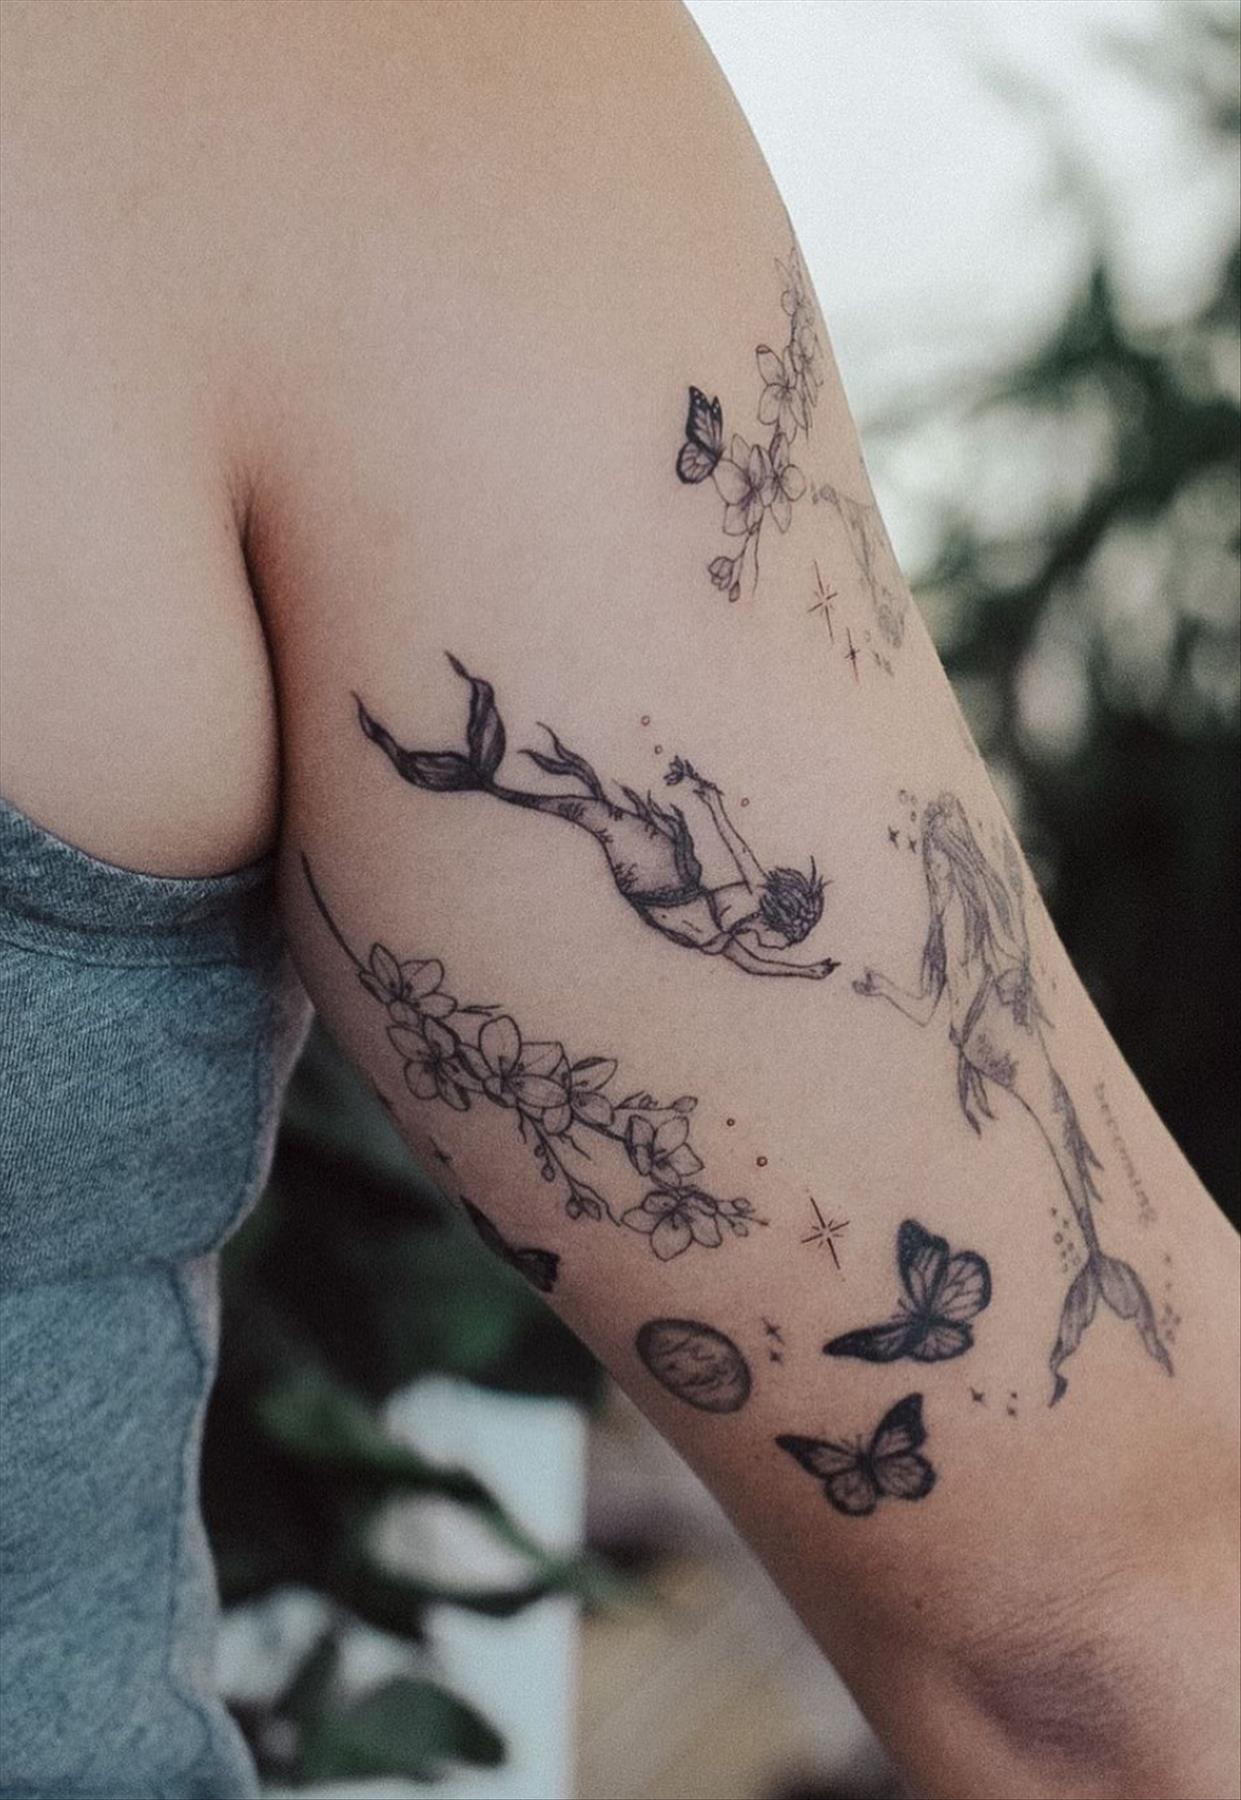 Pretty Butterfly Tattoo Ideas to Inspire Your Next Inked Tattoo